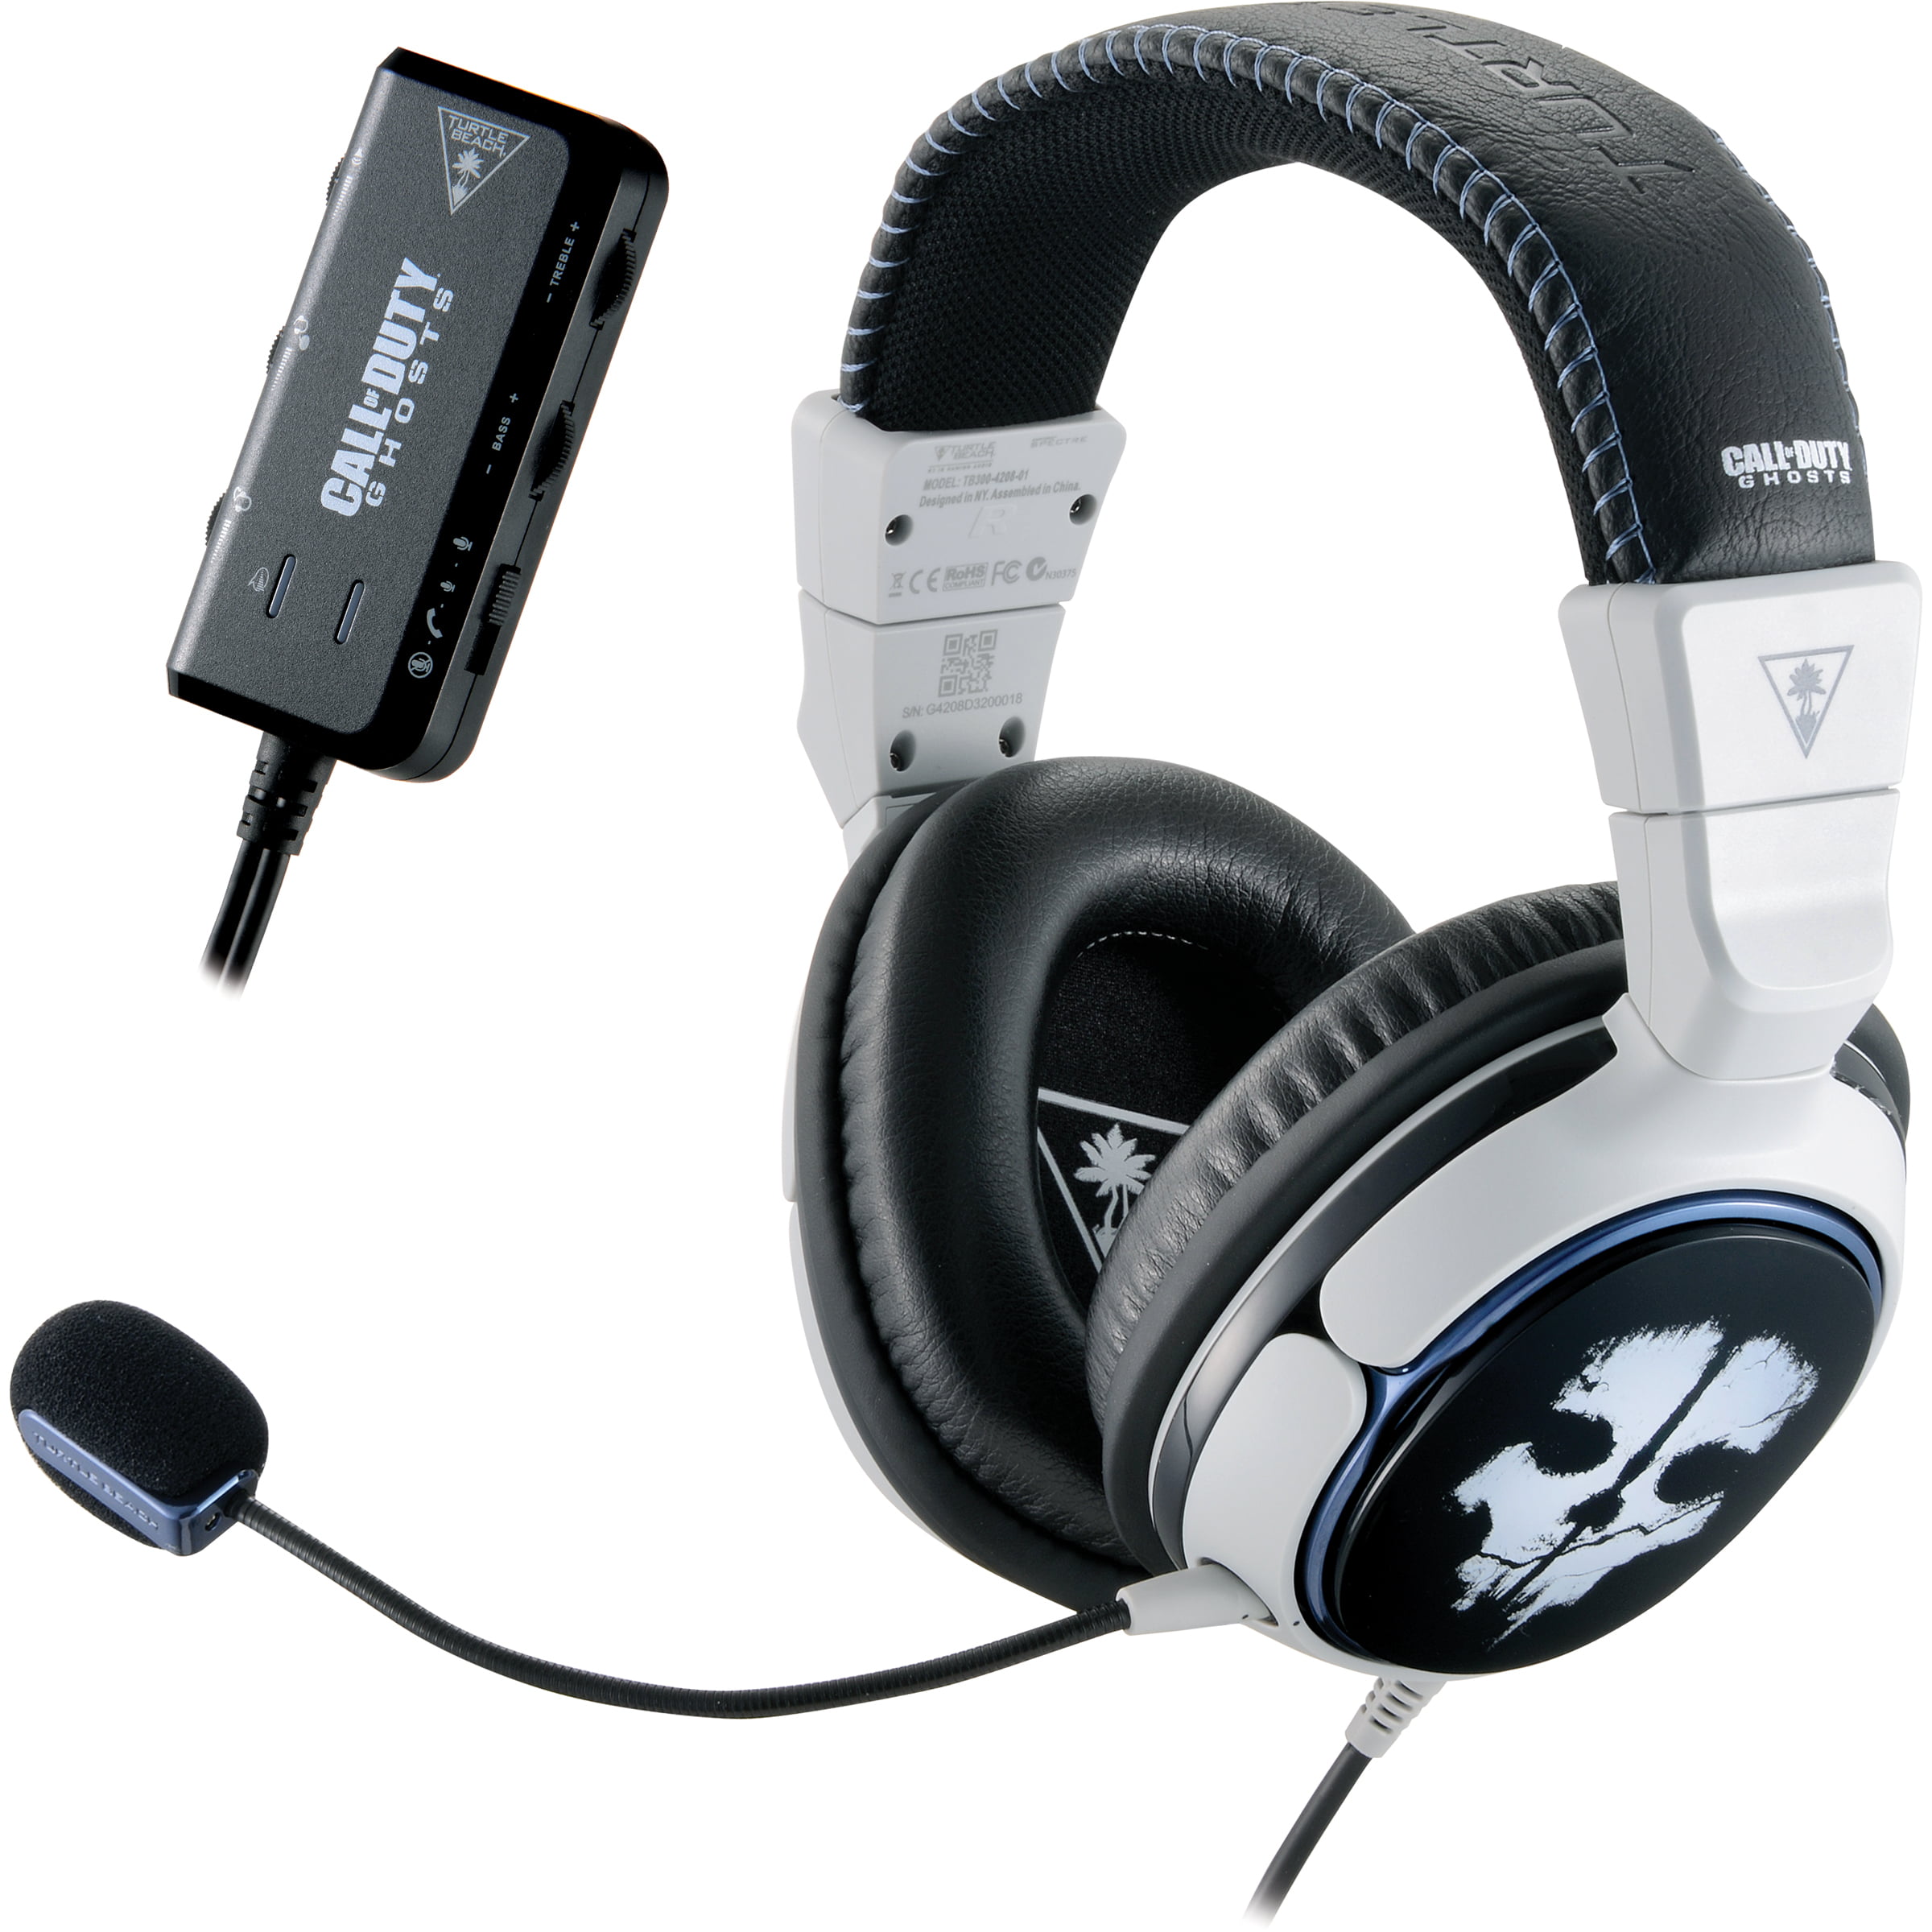 Call Of Duty Ghosts Ear Force Spectre Limited Edition Headset